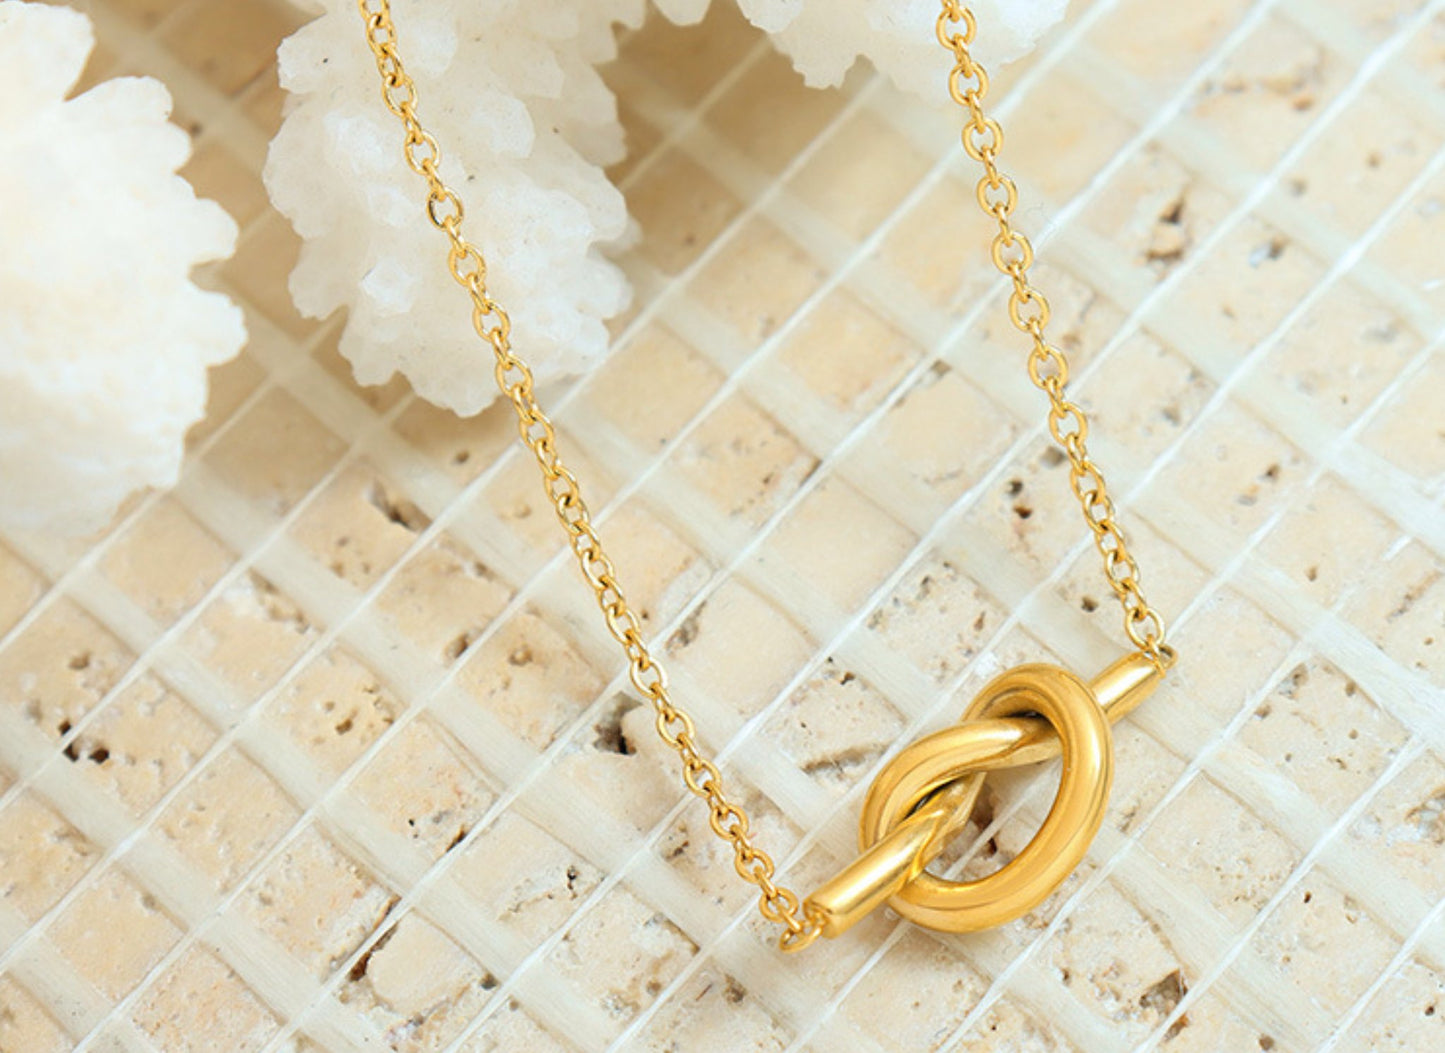 Knotted Heart Love Pendant Necklace/Waterproof